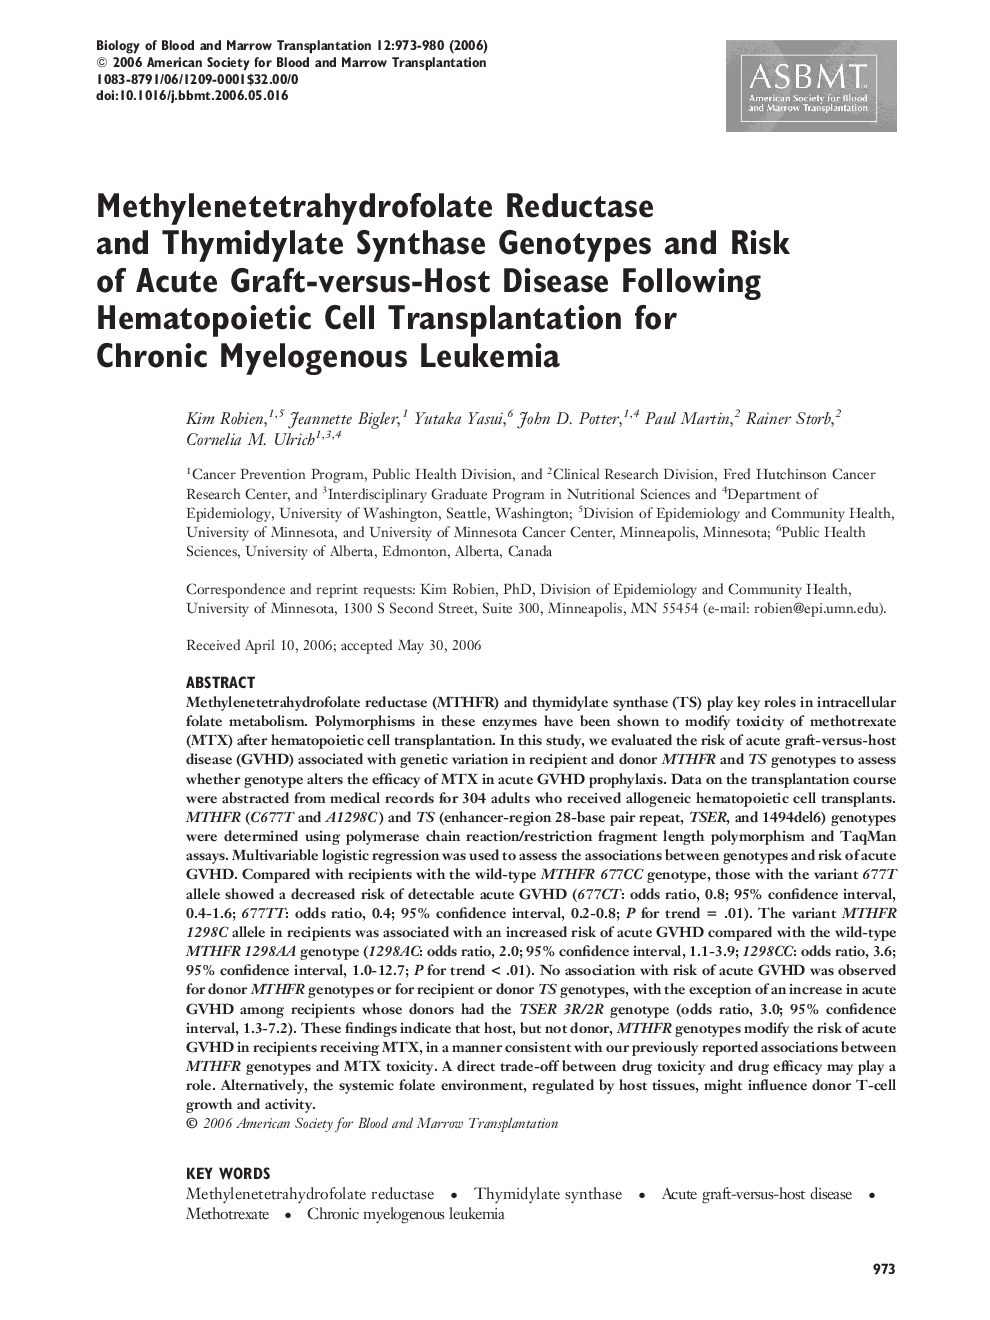 Methylenetetrahydrofolate Reductase and Thymidylate Synthase Genotypes and Risk of Acute Graft-versus-Host Disease Following Hematopoietic Cell Transplantation for Chronic Myelogenous Leukemia